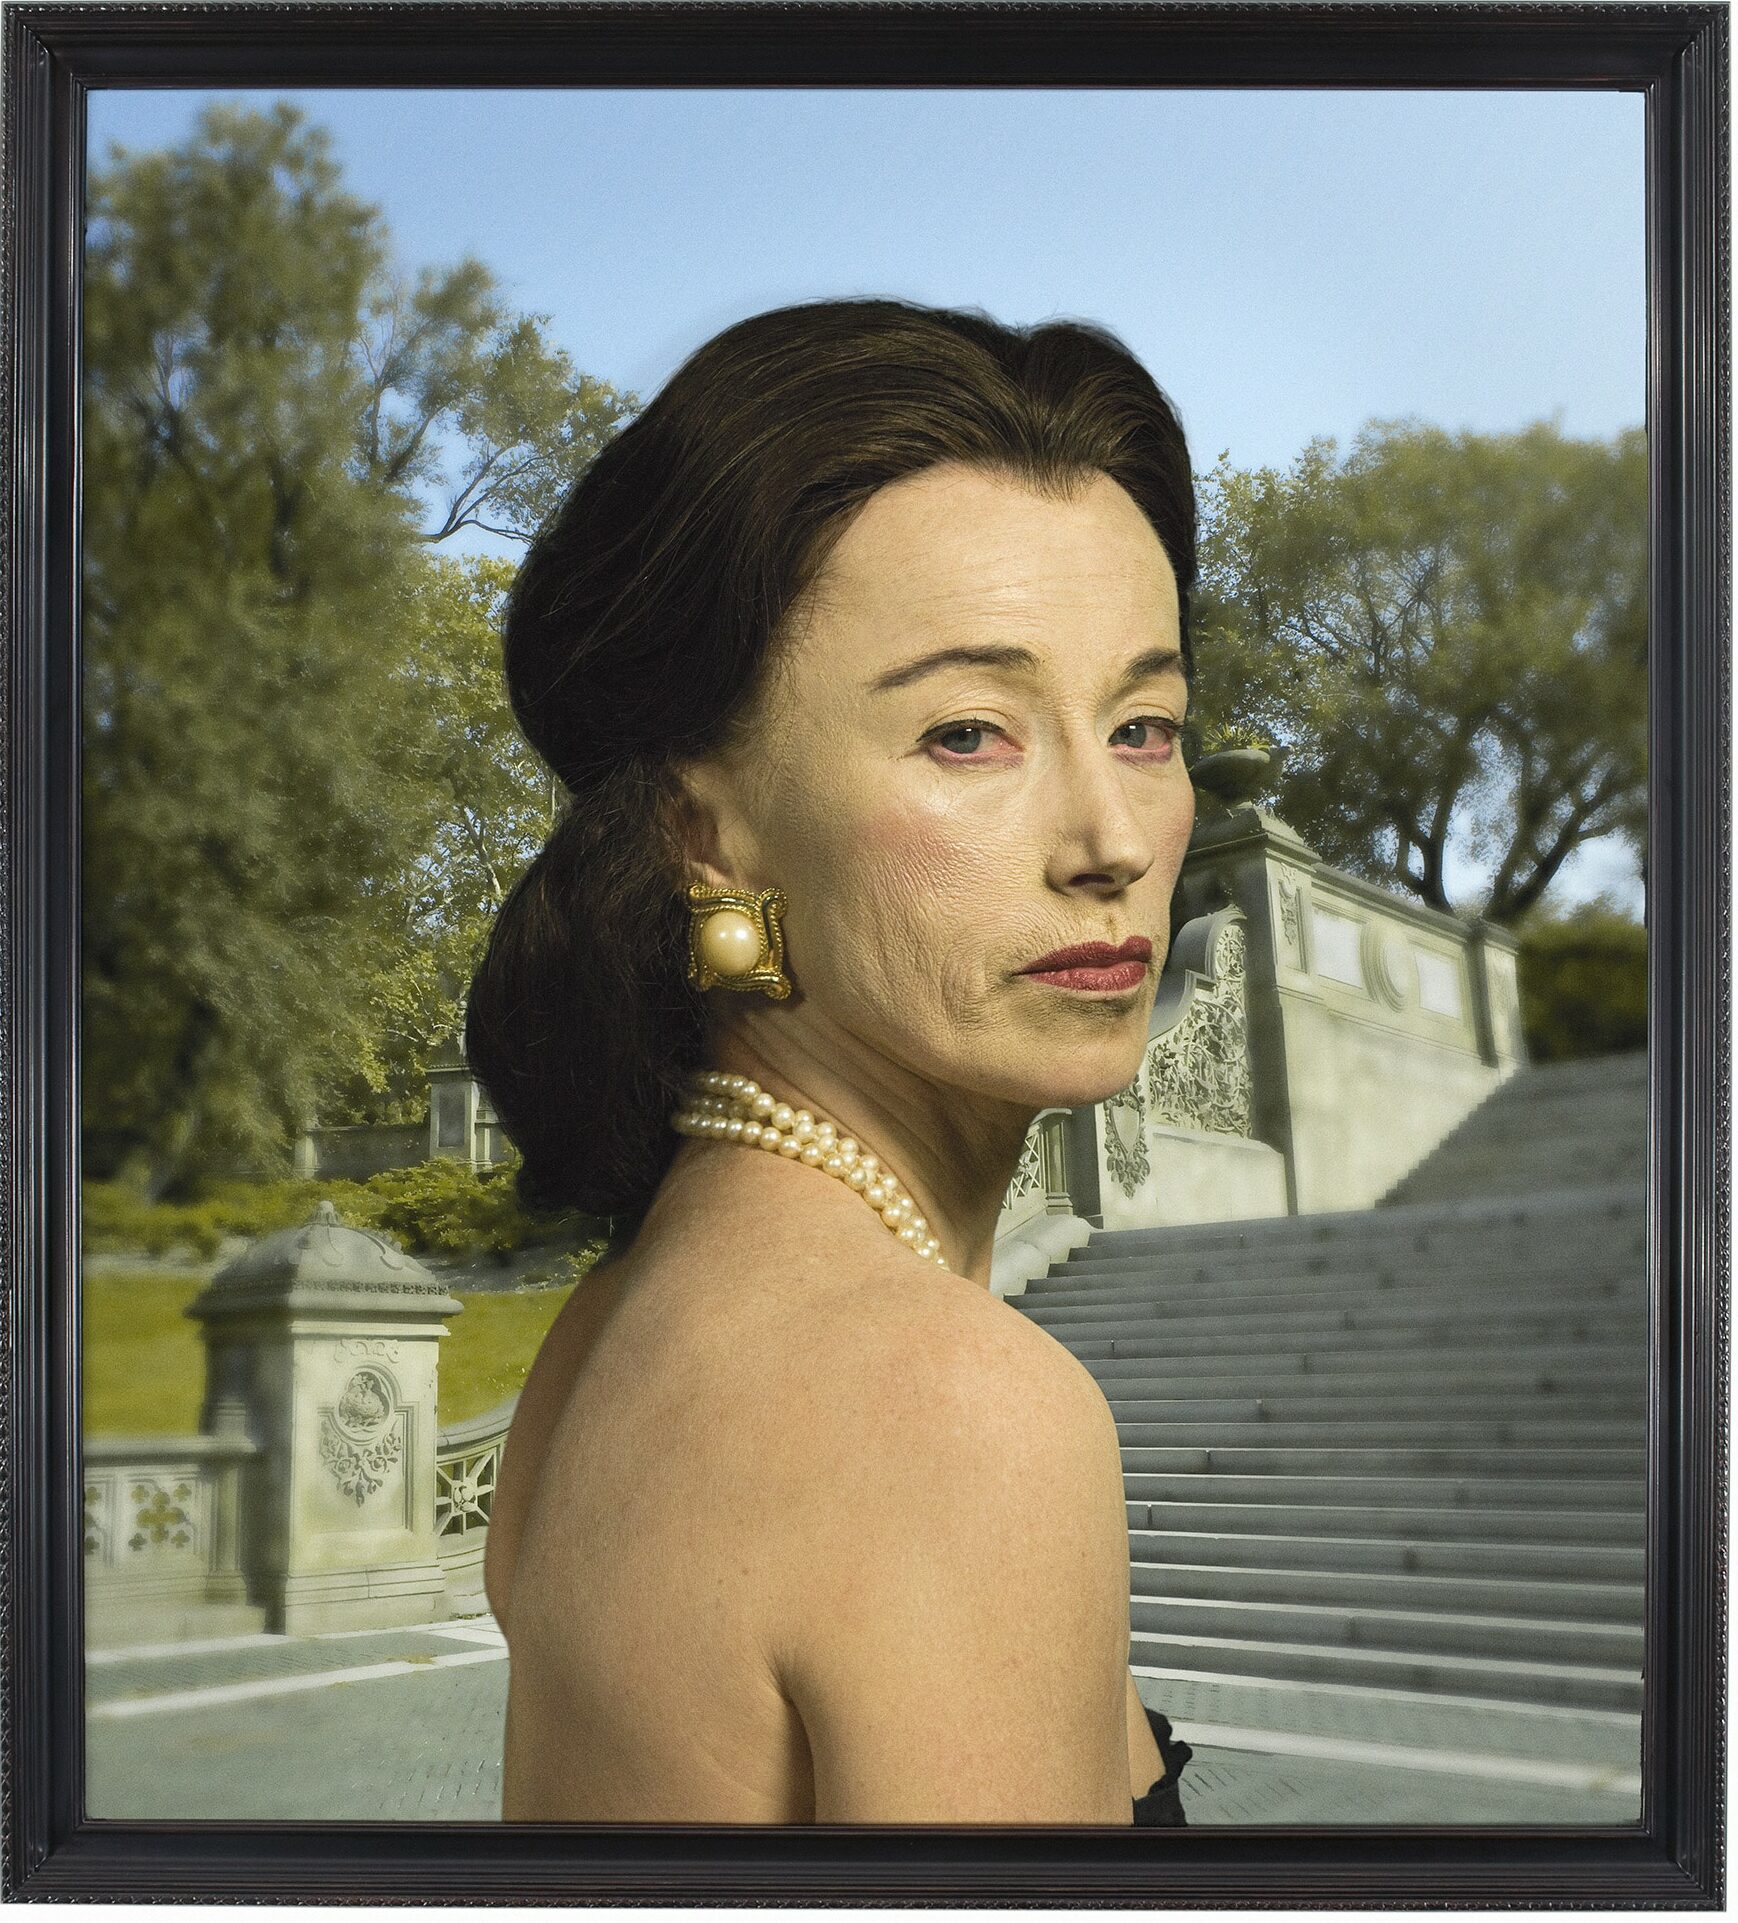 Cindy Sherman's Enigmatic Self-Portraits Take Over the Louis